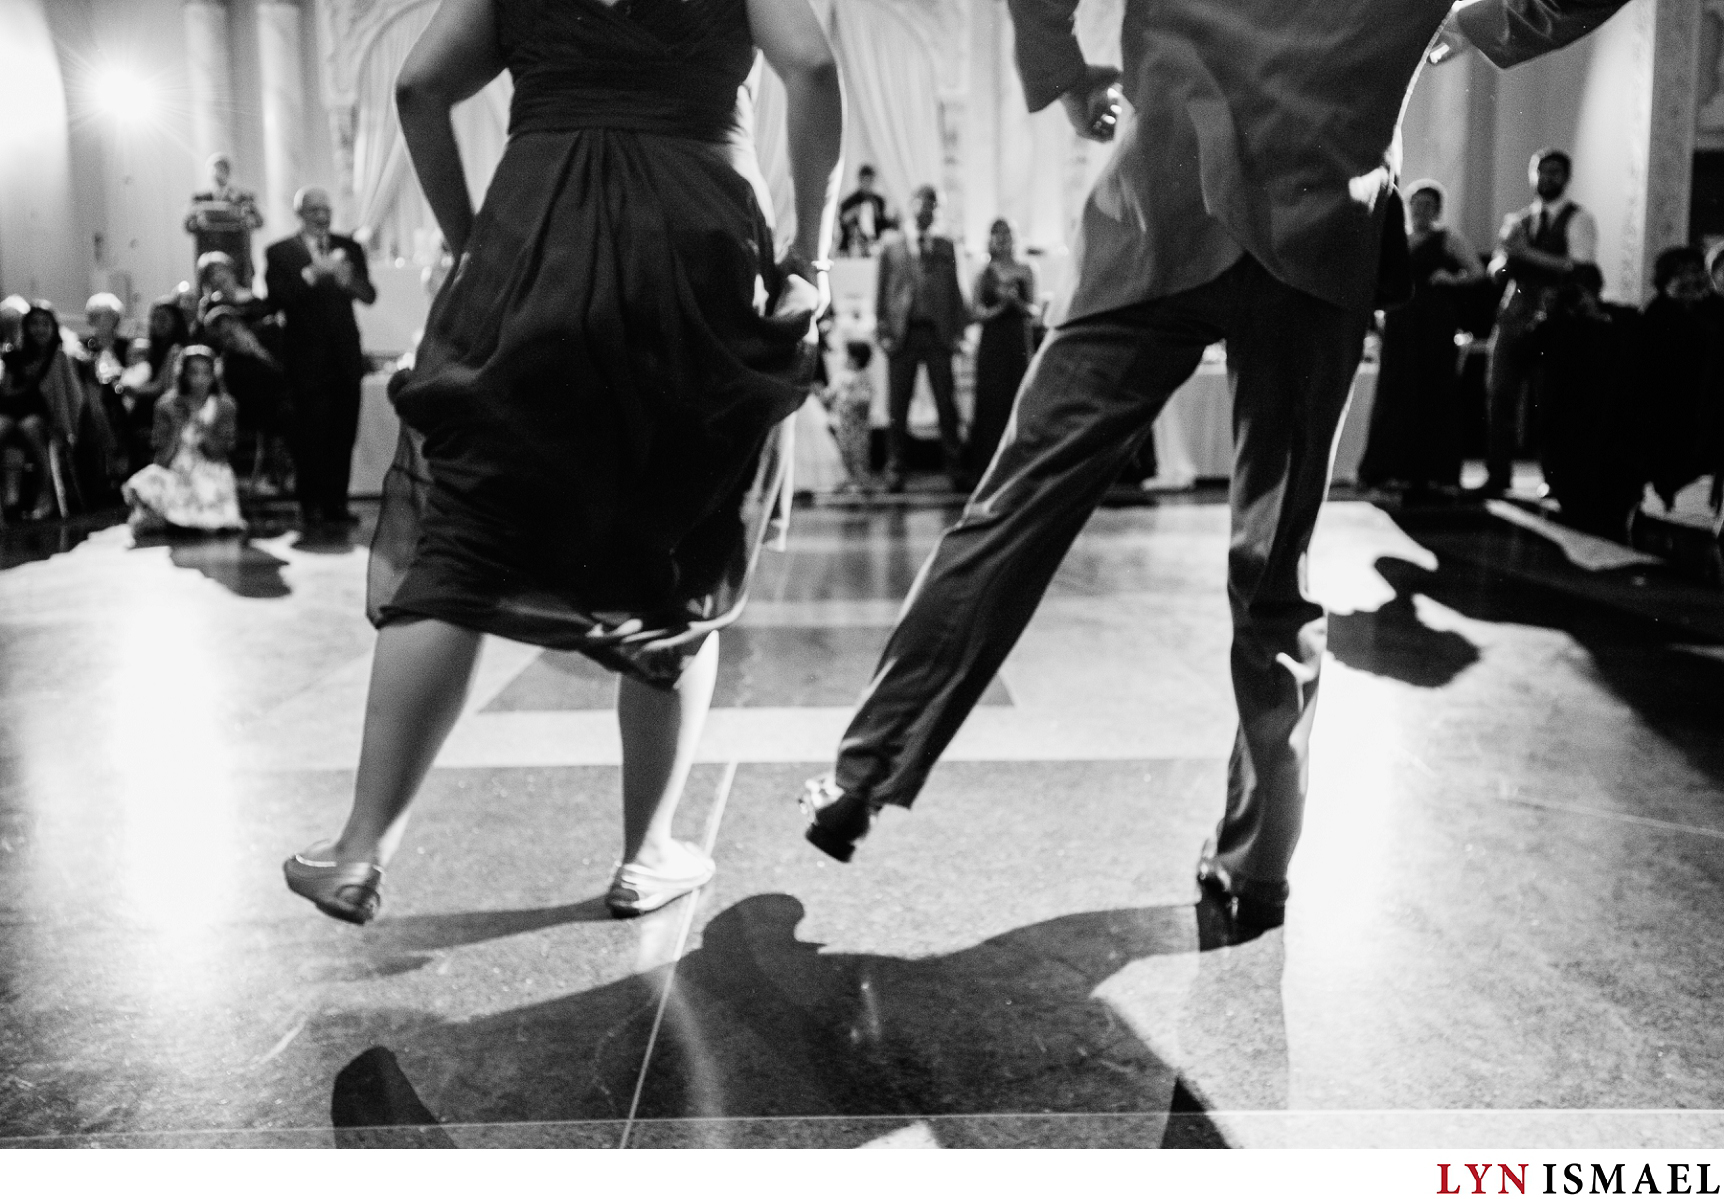 A bridesmaid and a groomsmanshowing off their dance moves as they were introduced at a wedding reception in Vaughan, Ontario.